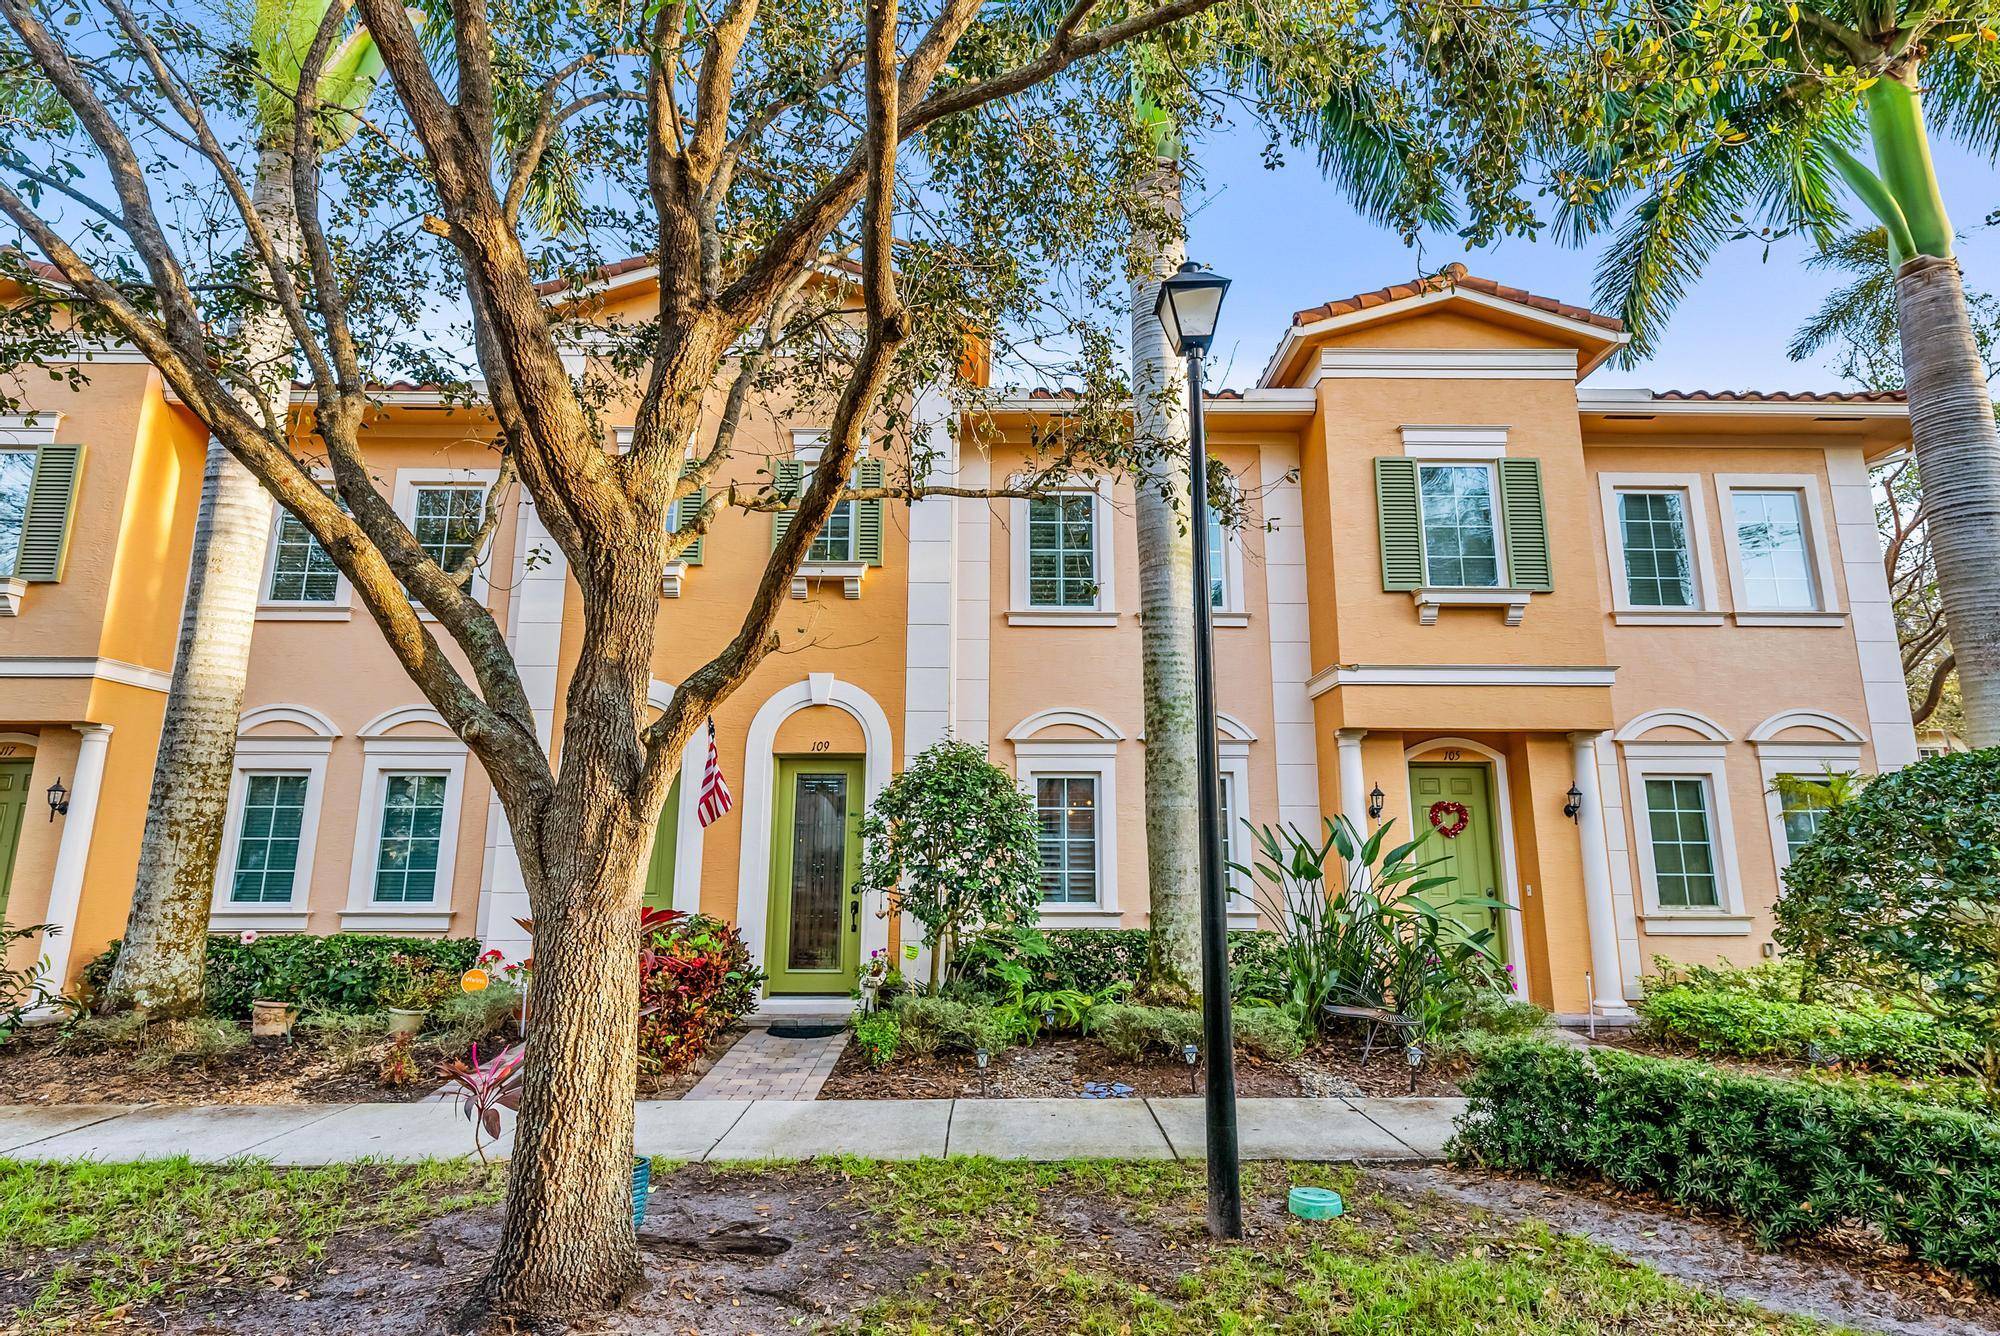 Welcome to this delightful two story townhome located in the esteemed Canterbury Place community, nestled in the heart of Jupiter within the coveted Abacoa area.